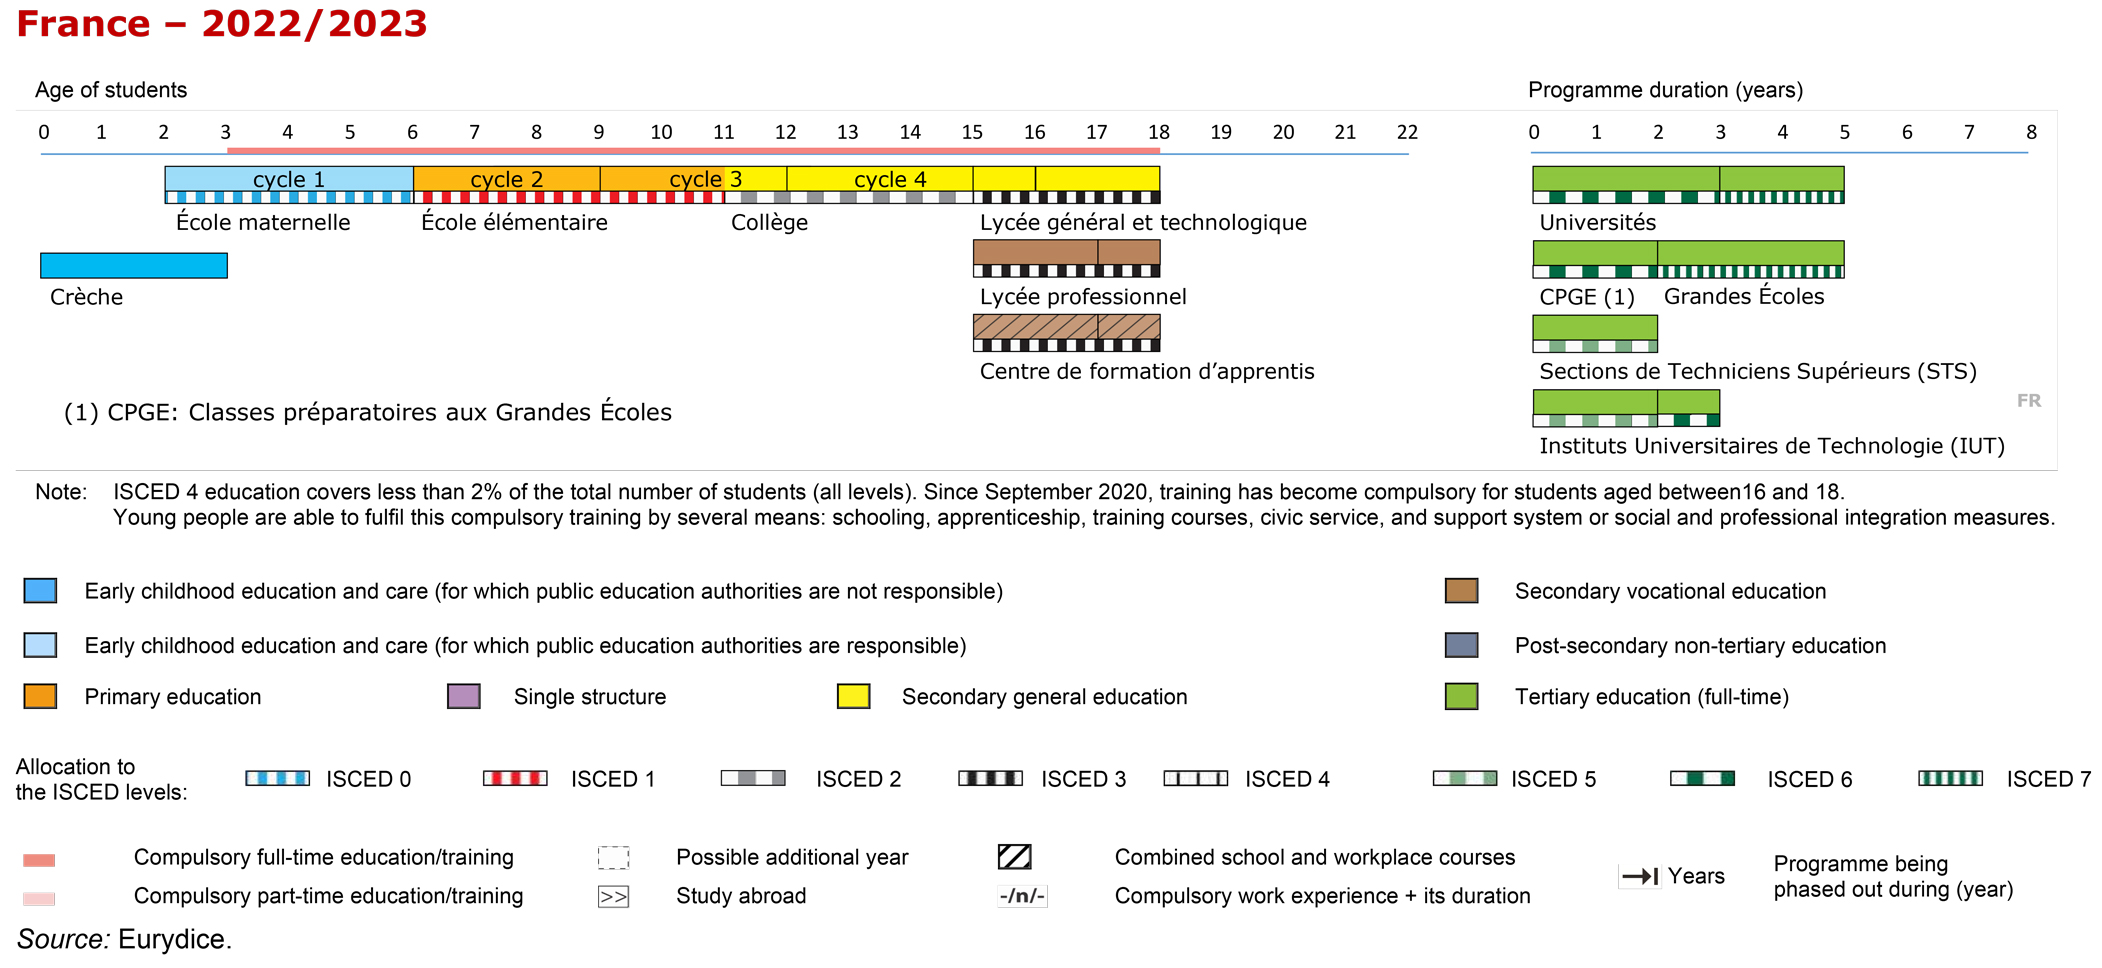 Structure of the National Education System FR